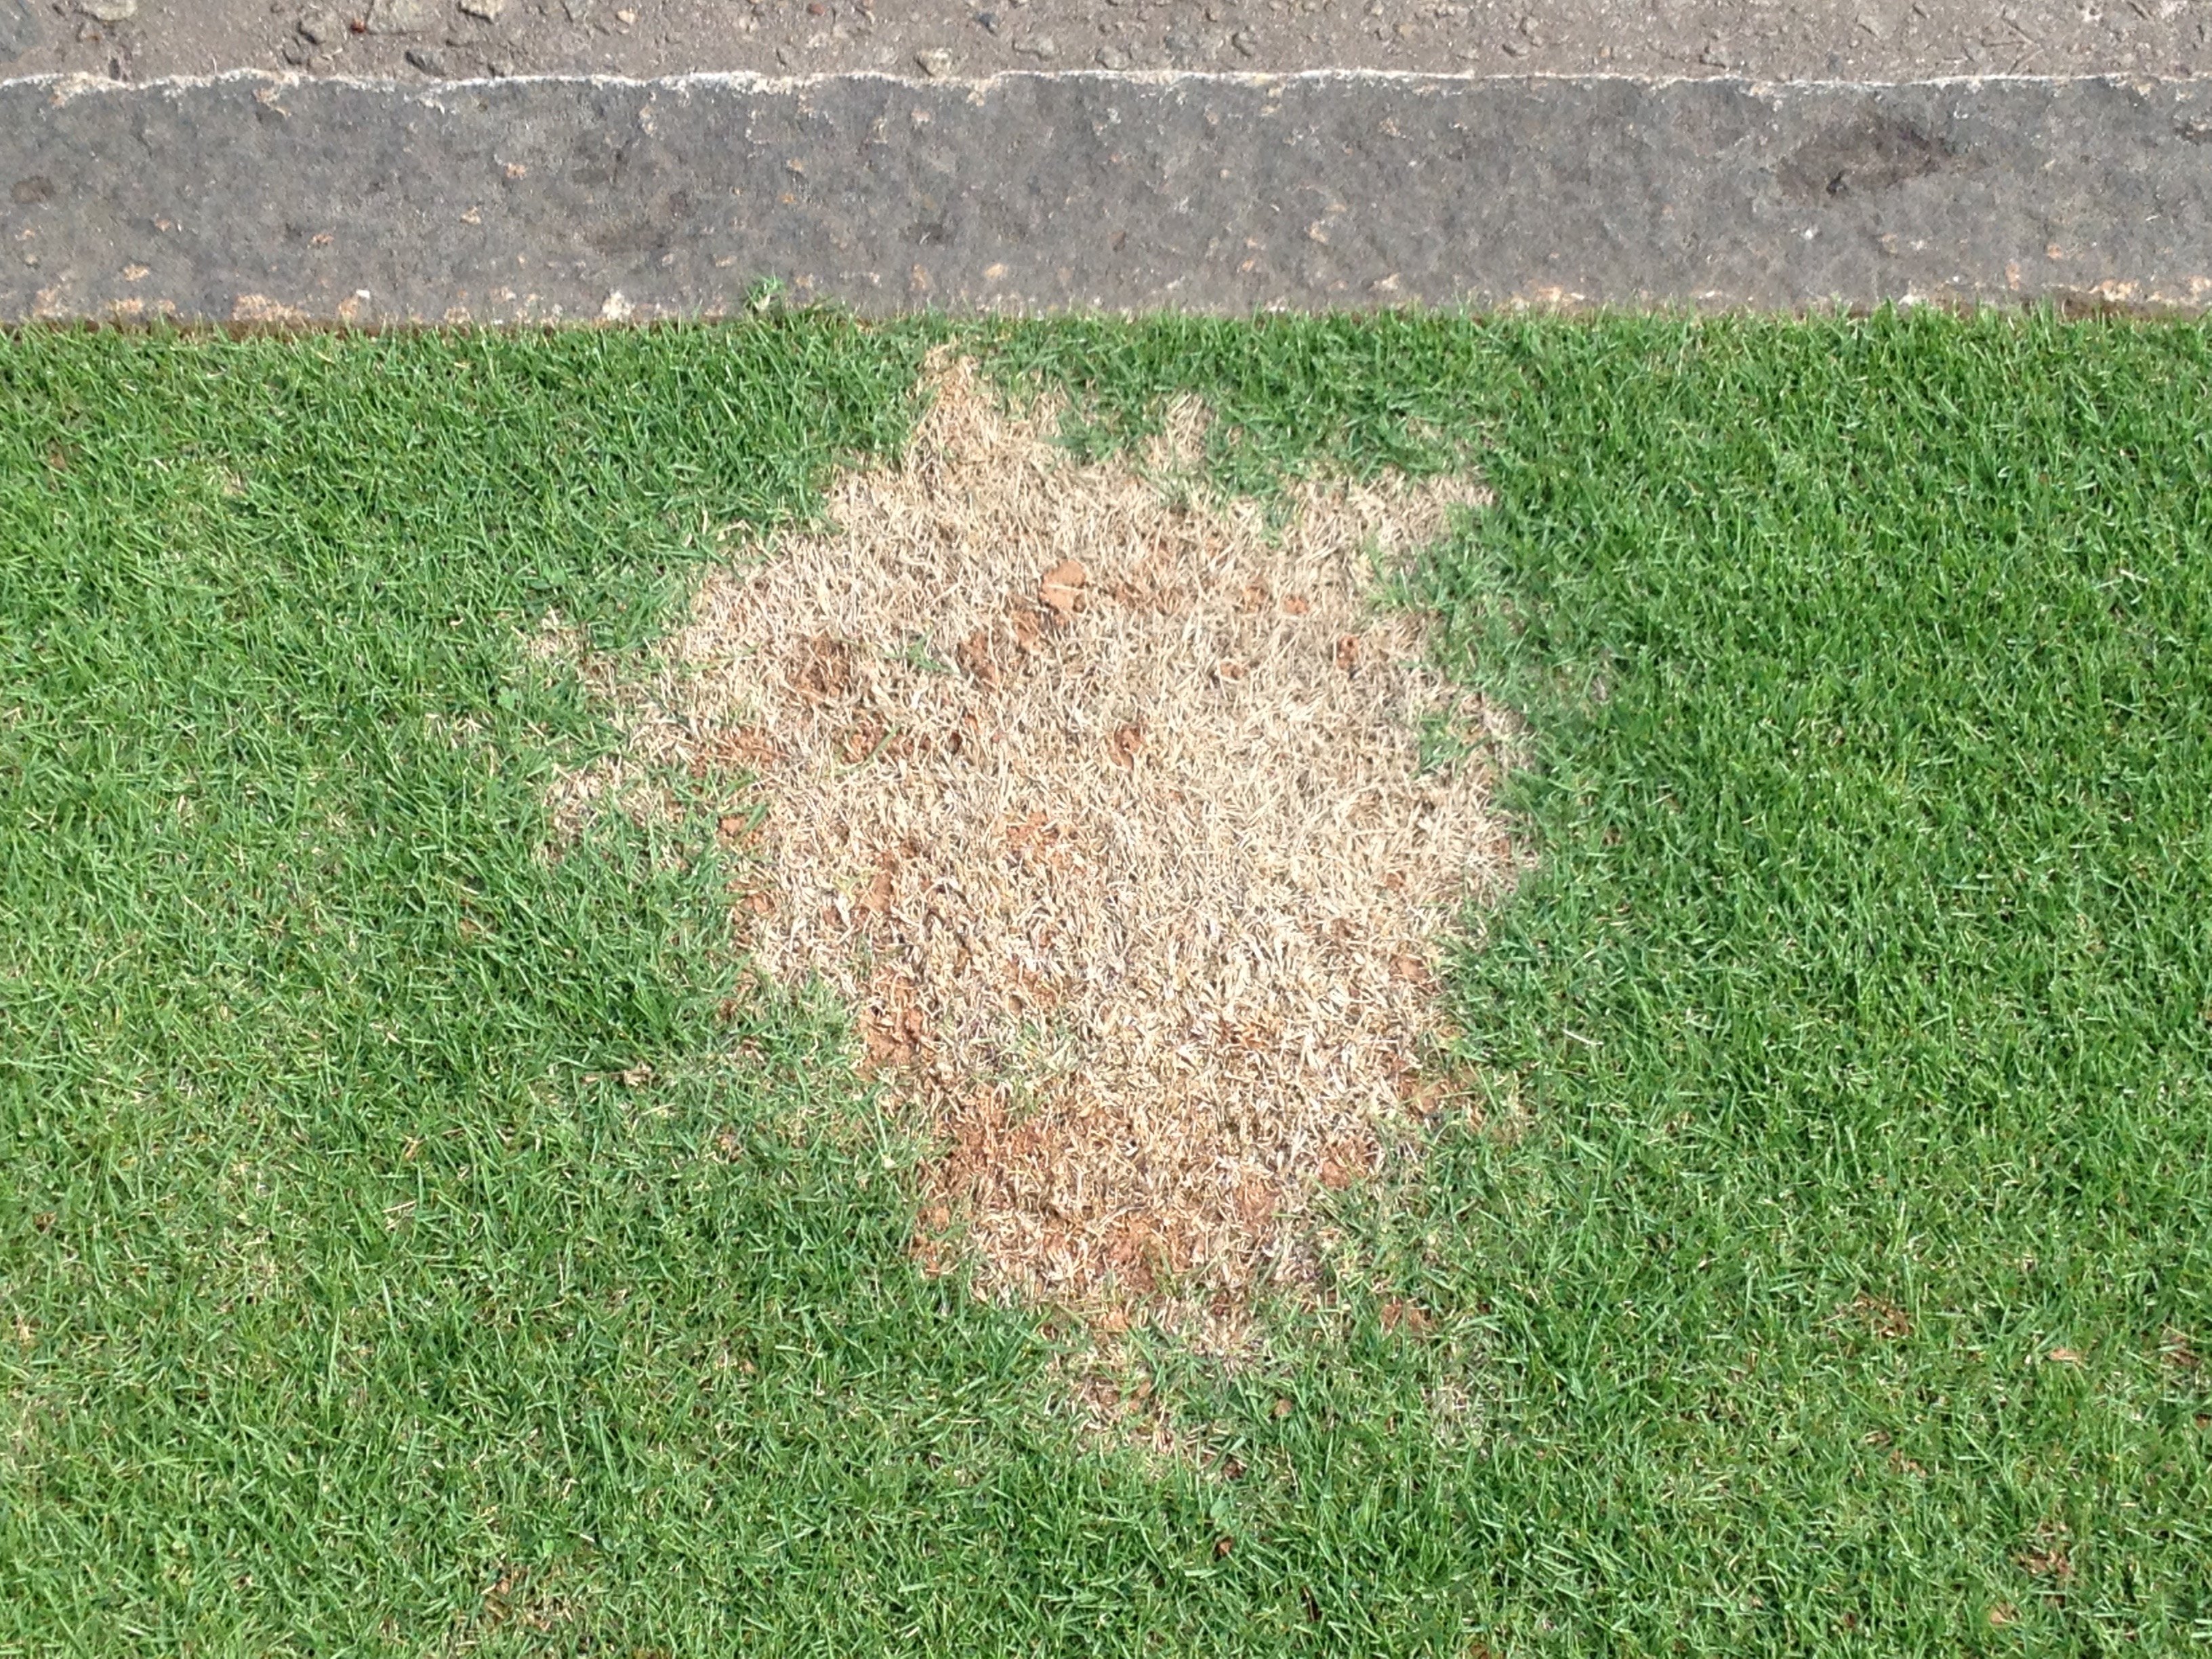 dog urine kills patches of lawn grass